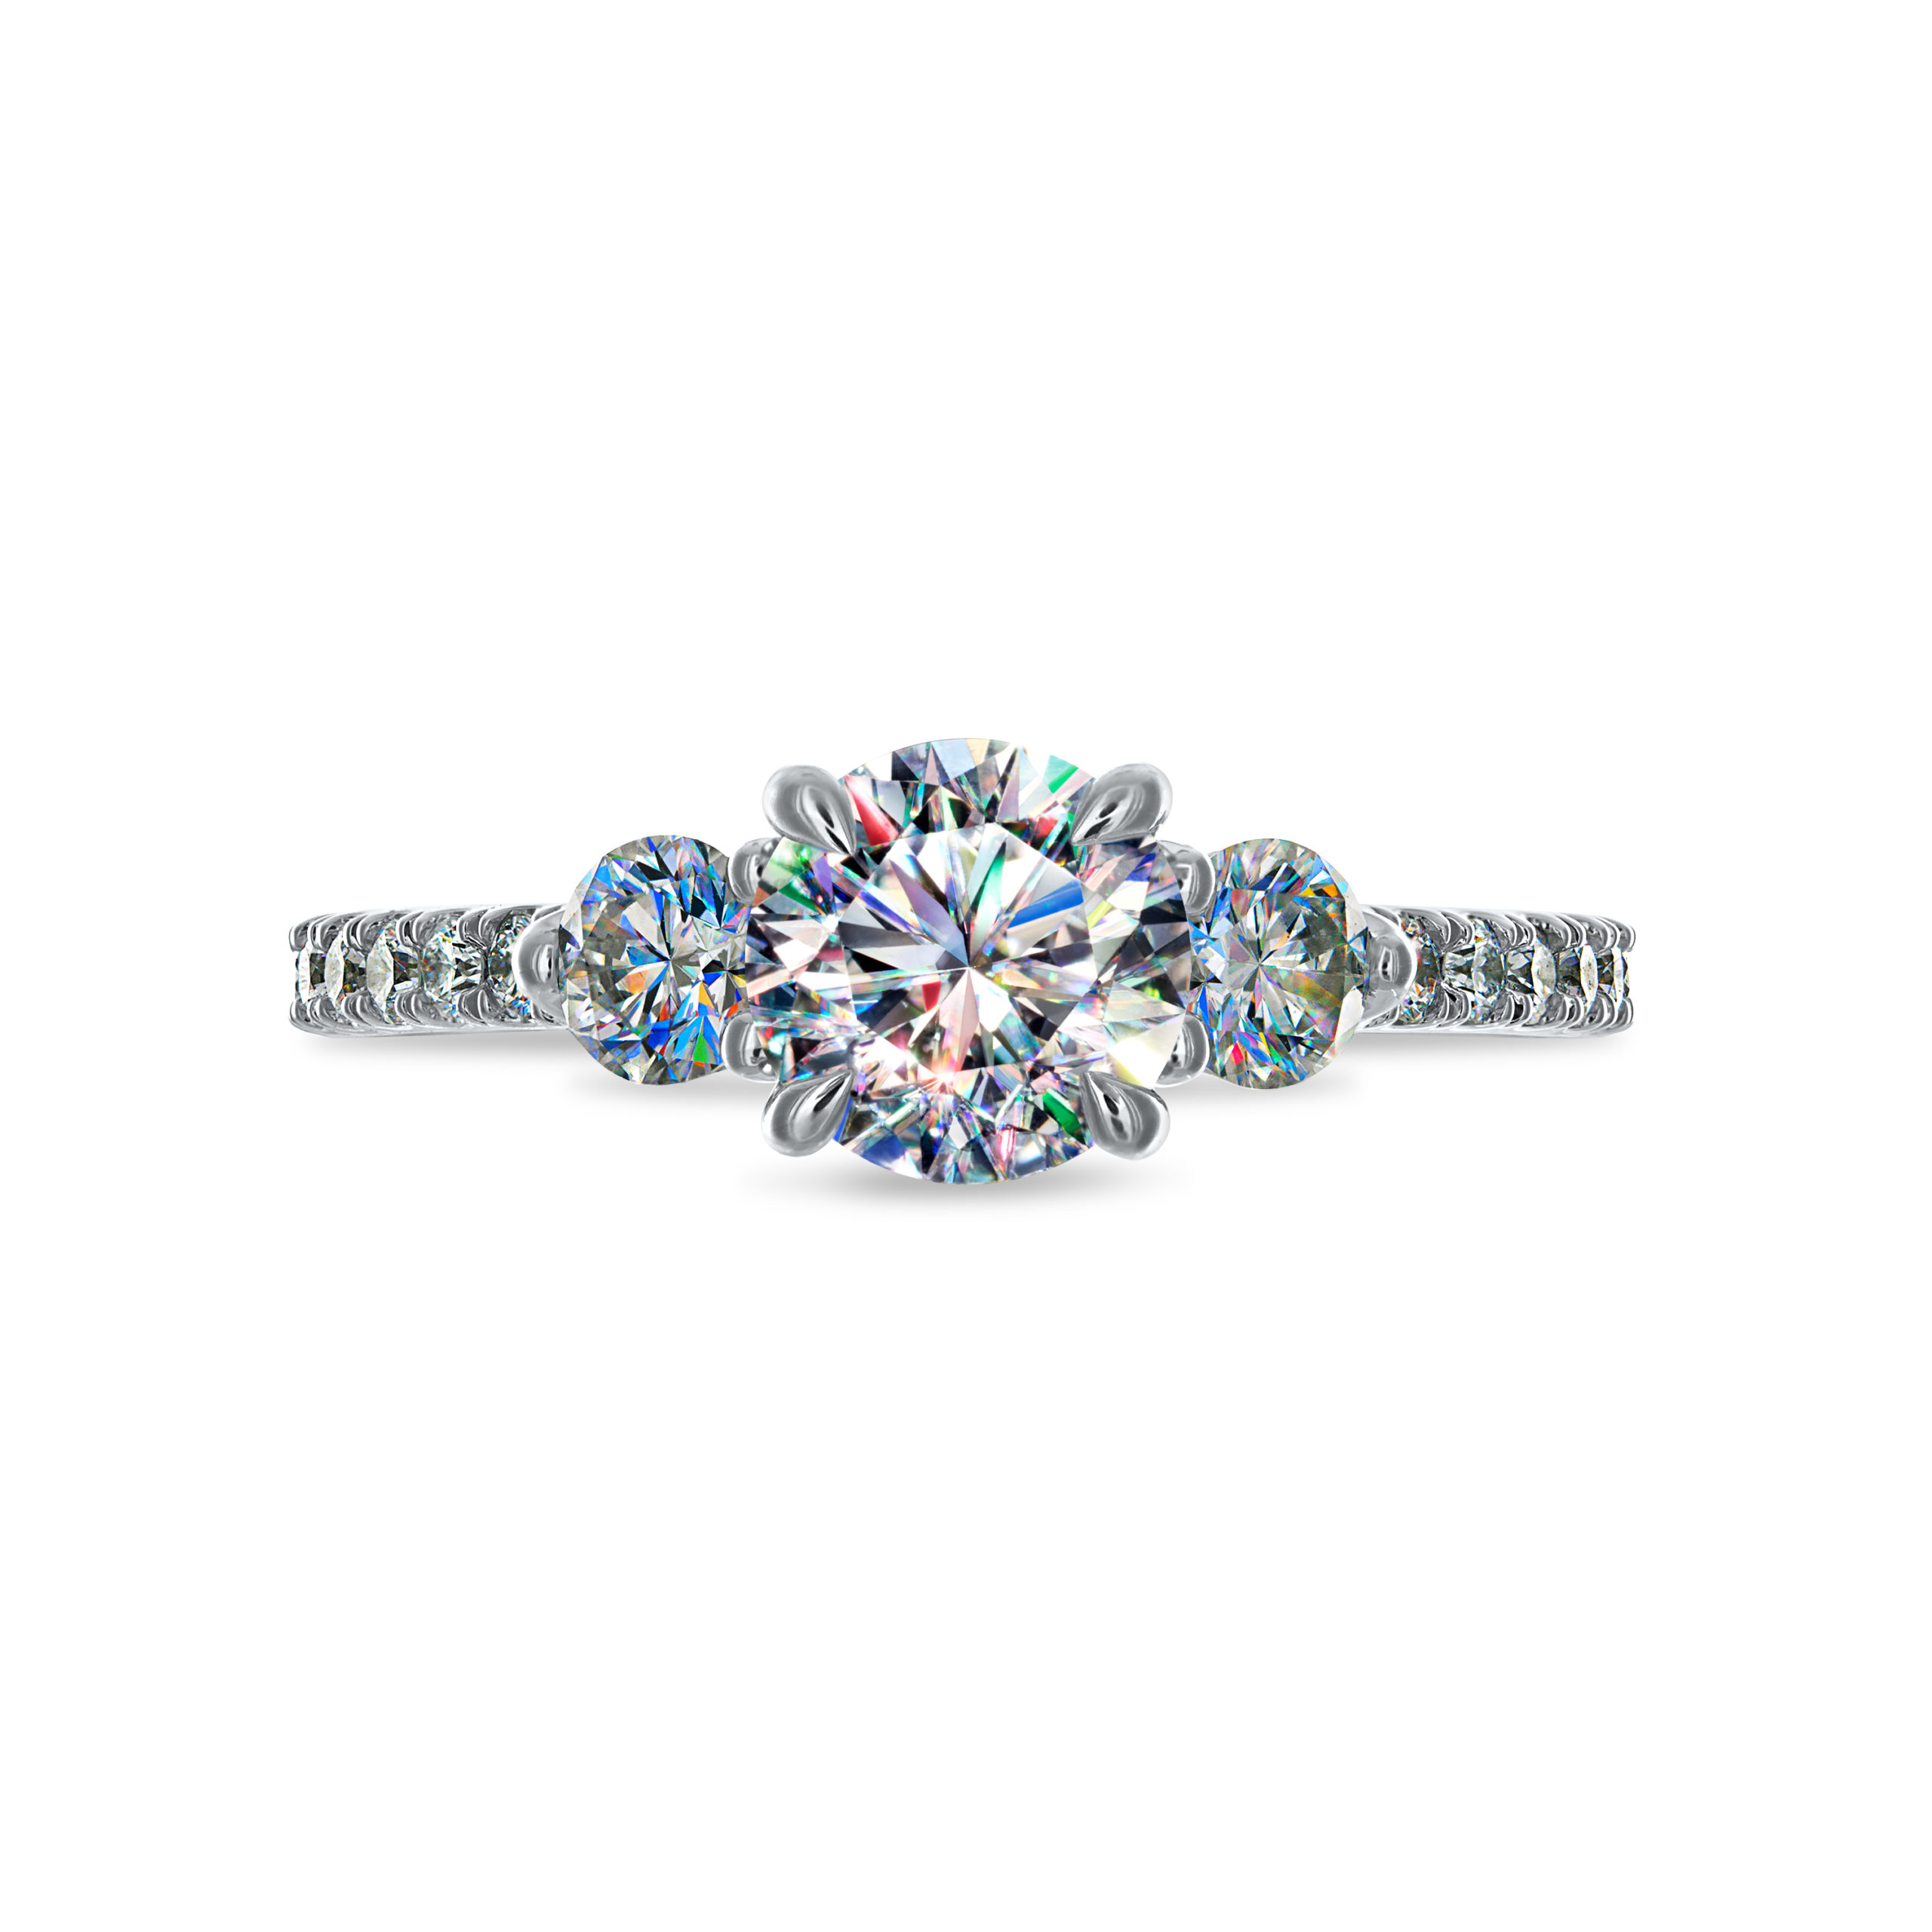 Facets of Fire 3 Stone Diamond Engagement Ring with Micropave Dia